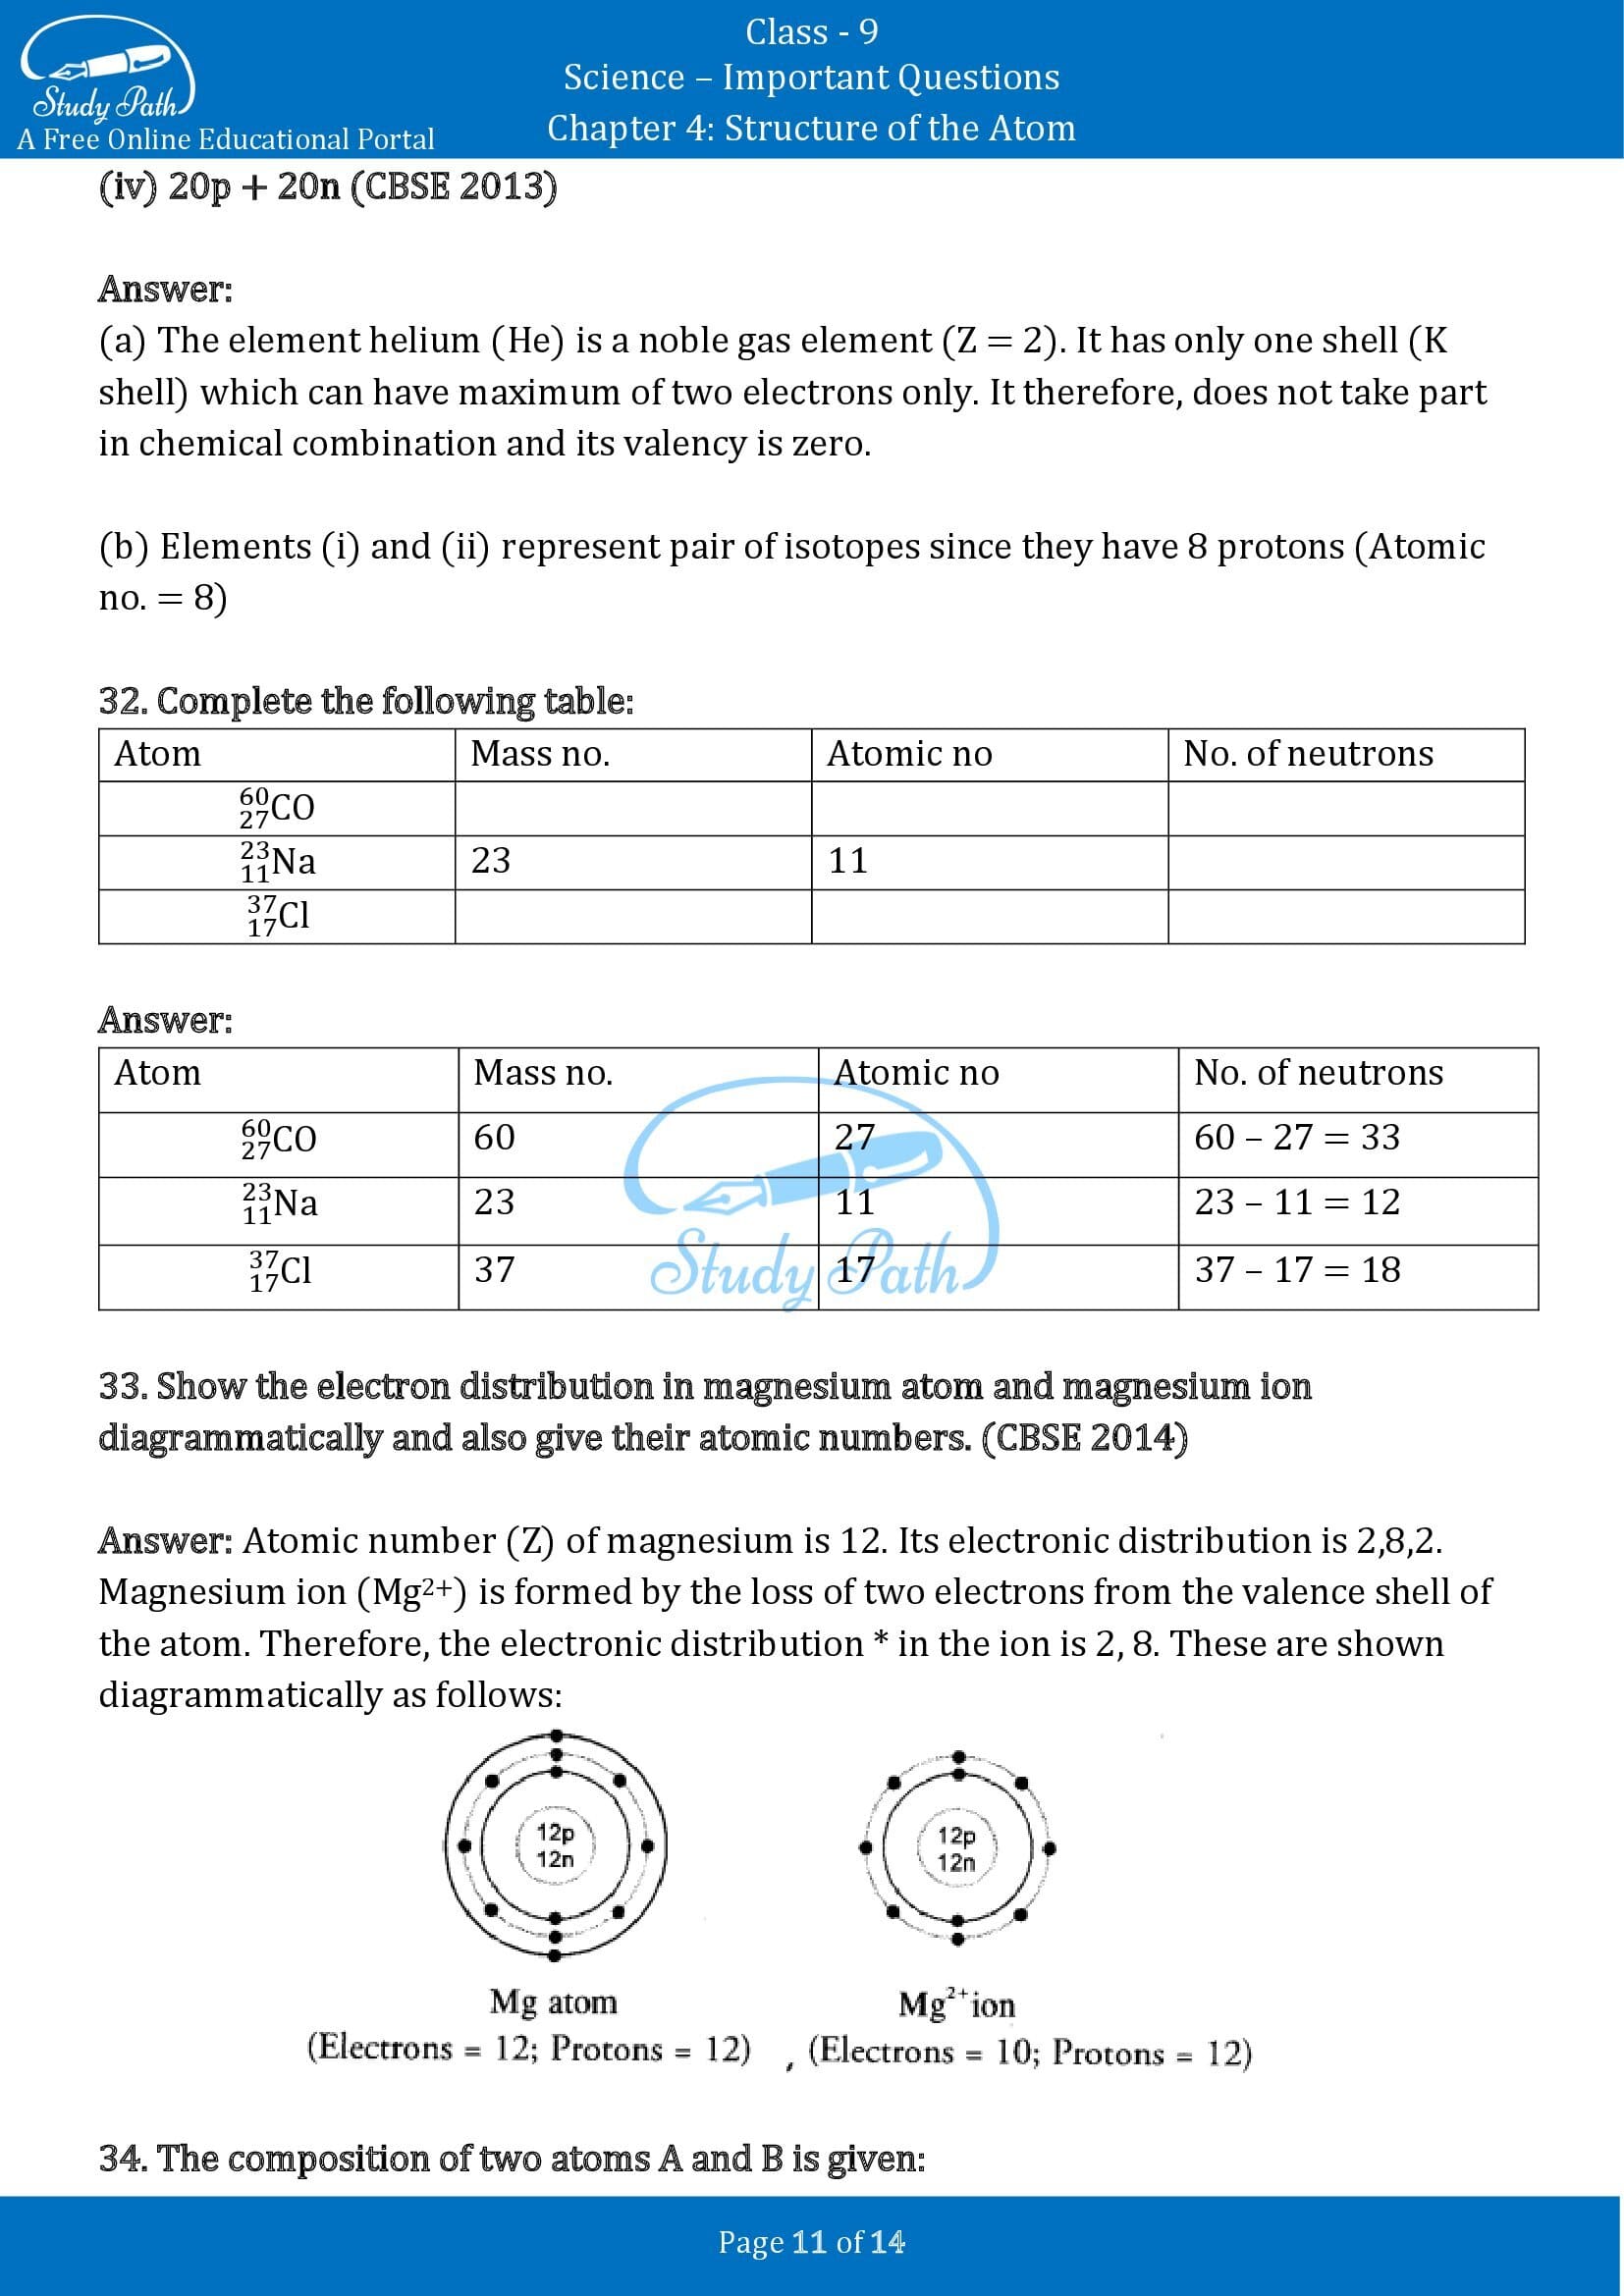 Important Questions for Class 9 Science Chapter 4 Structure of the Atom 00011